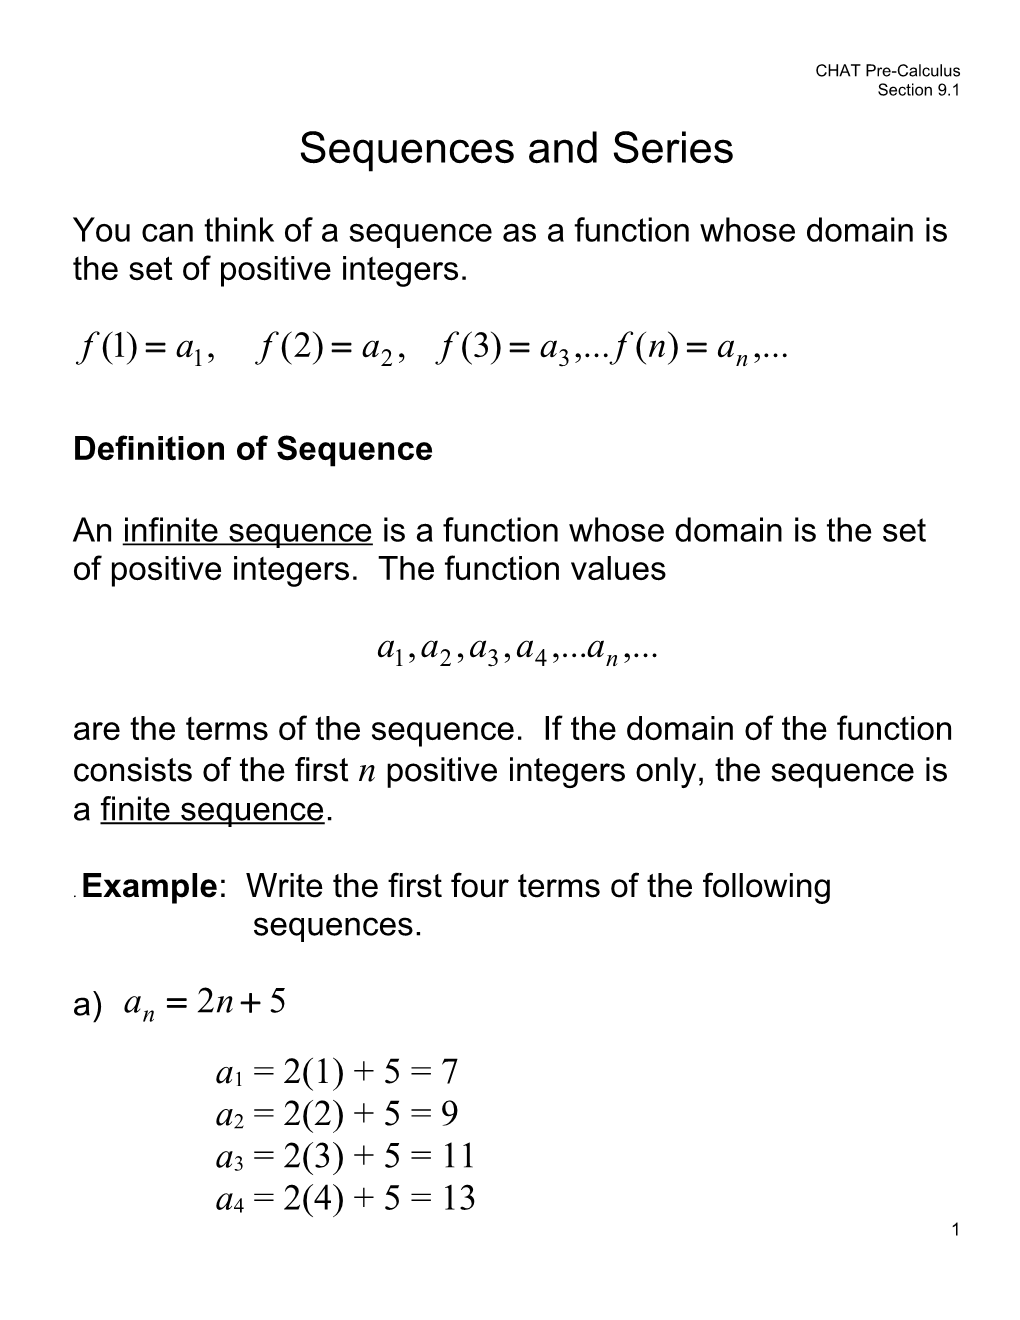 You Can Think of a Sequence As a Function Whose Domain Is the Set of Positive Integers